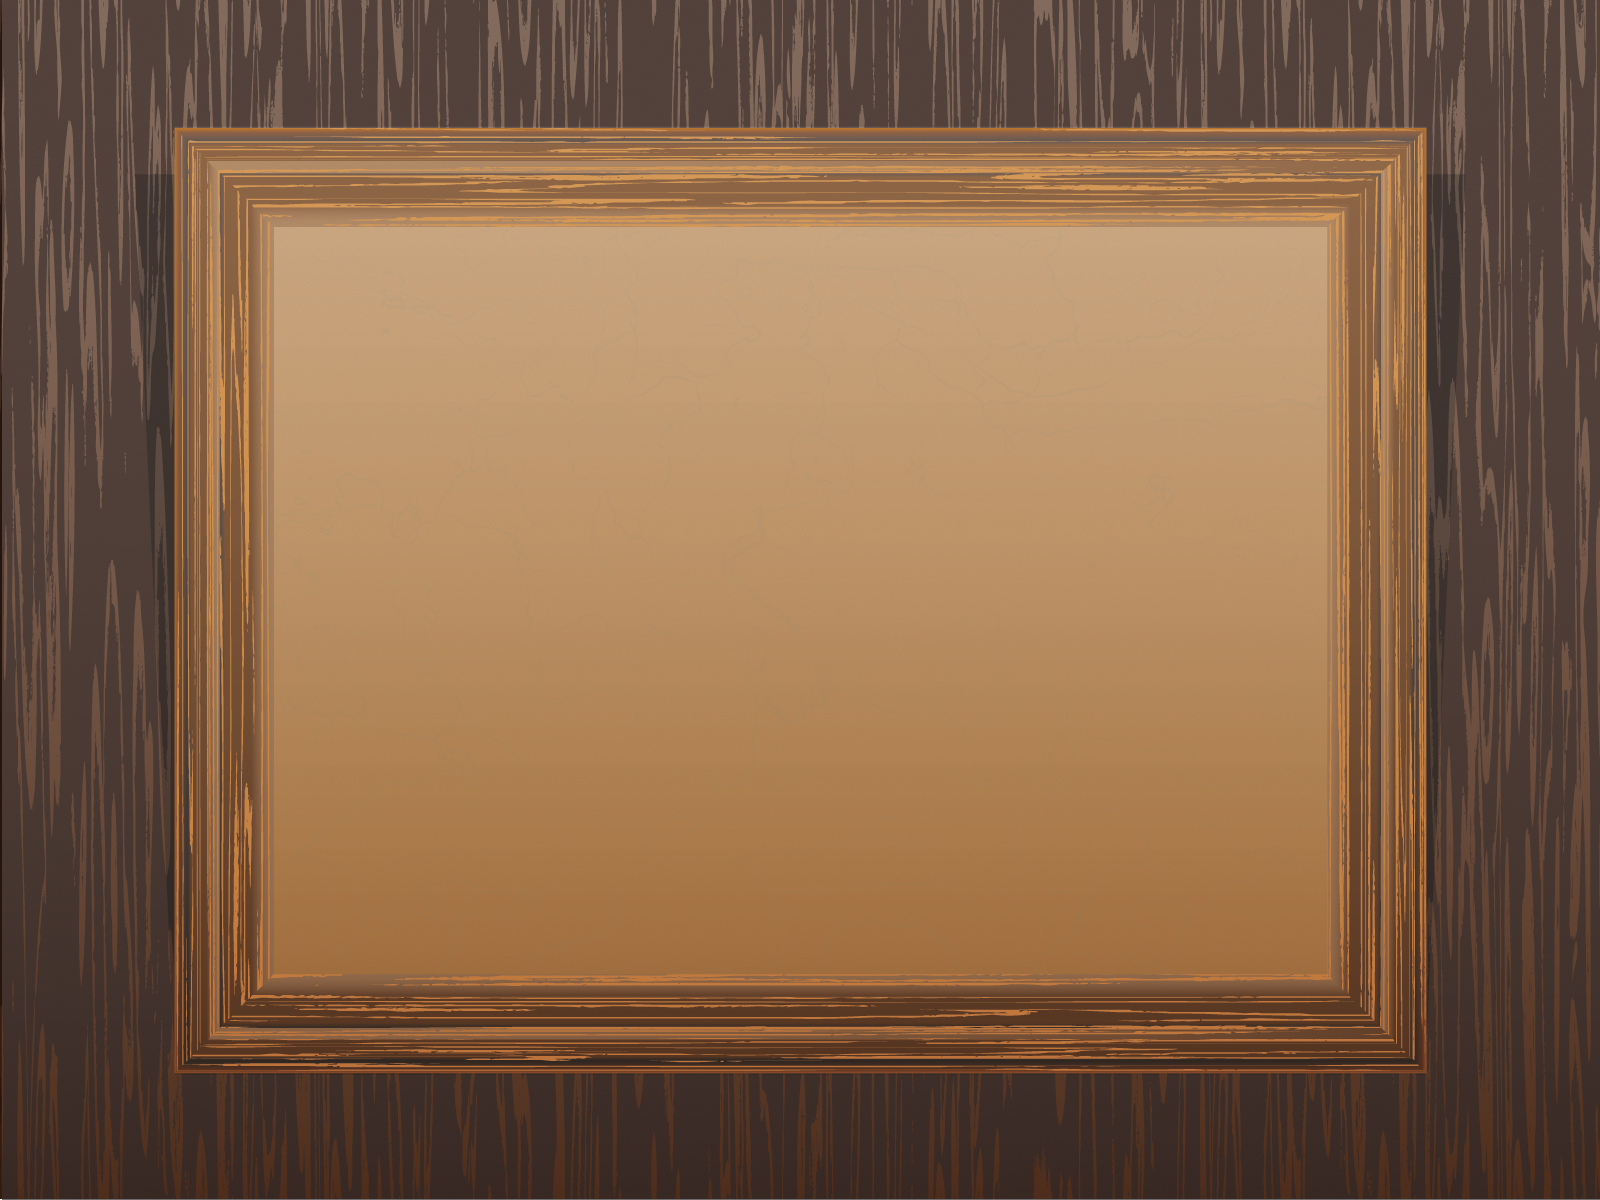 Brown-Wooden-Frame-Backgrounds by ppttemplates on DeviantArt